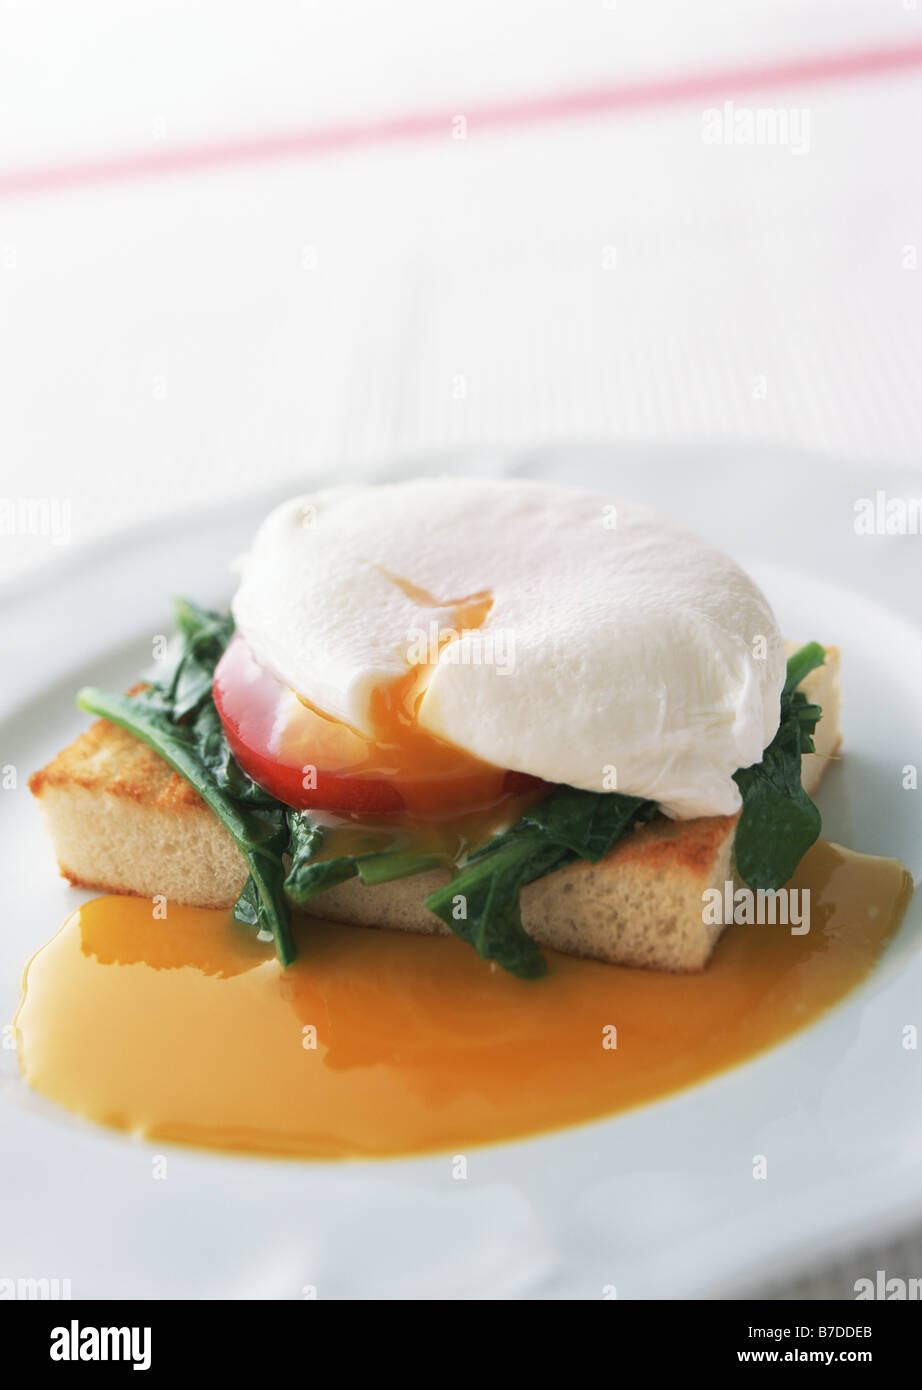 Poached Egg and Bread Stock Photo